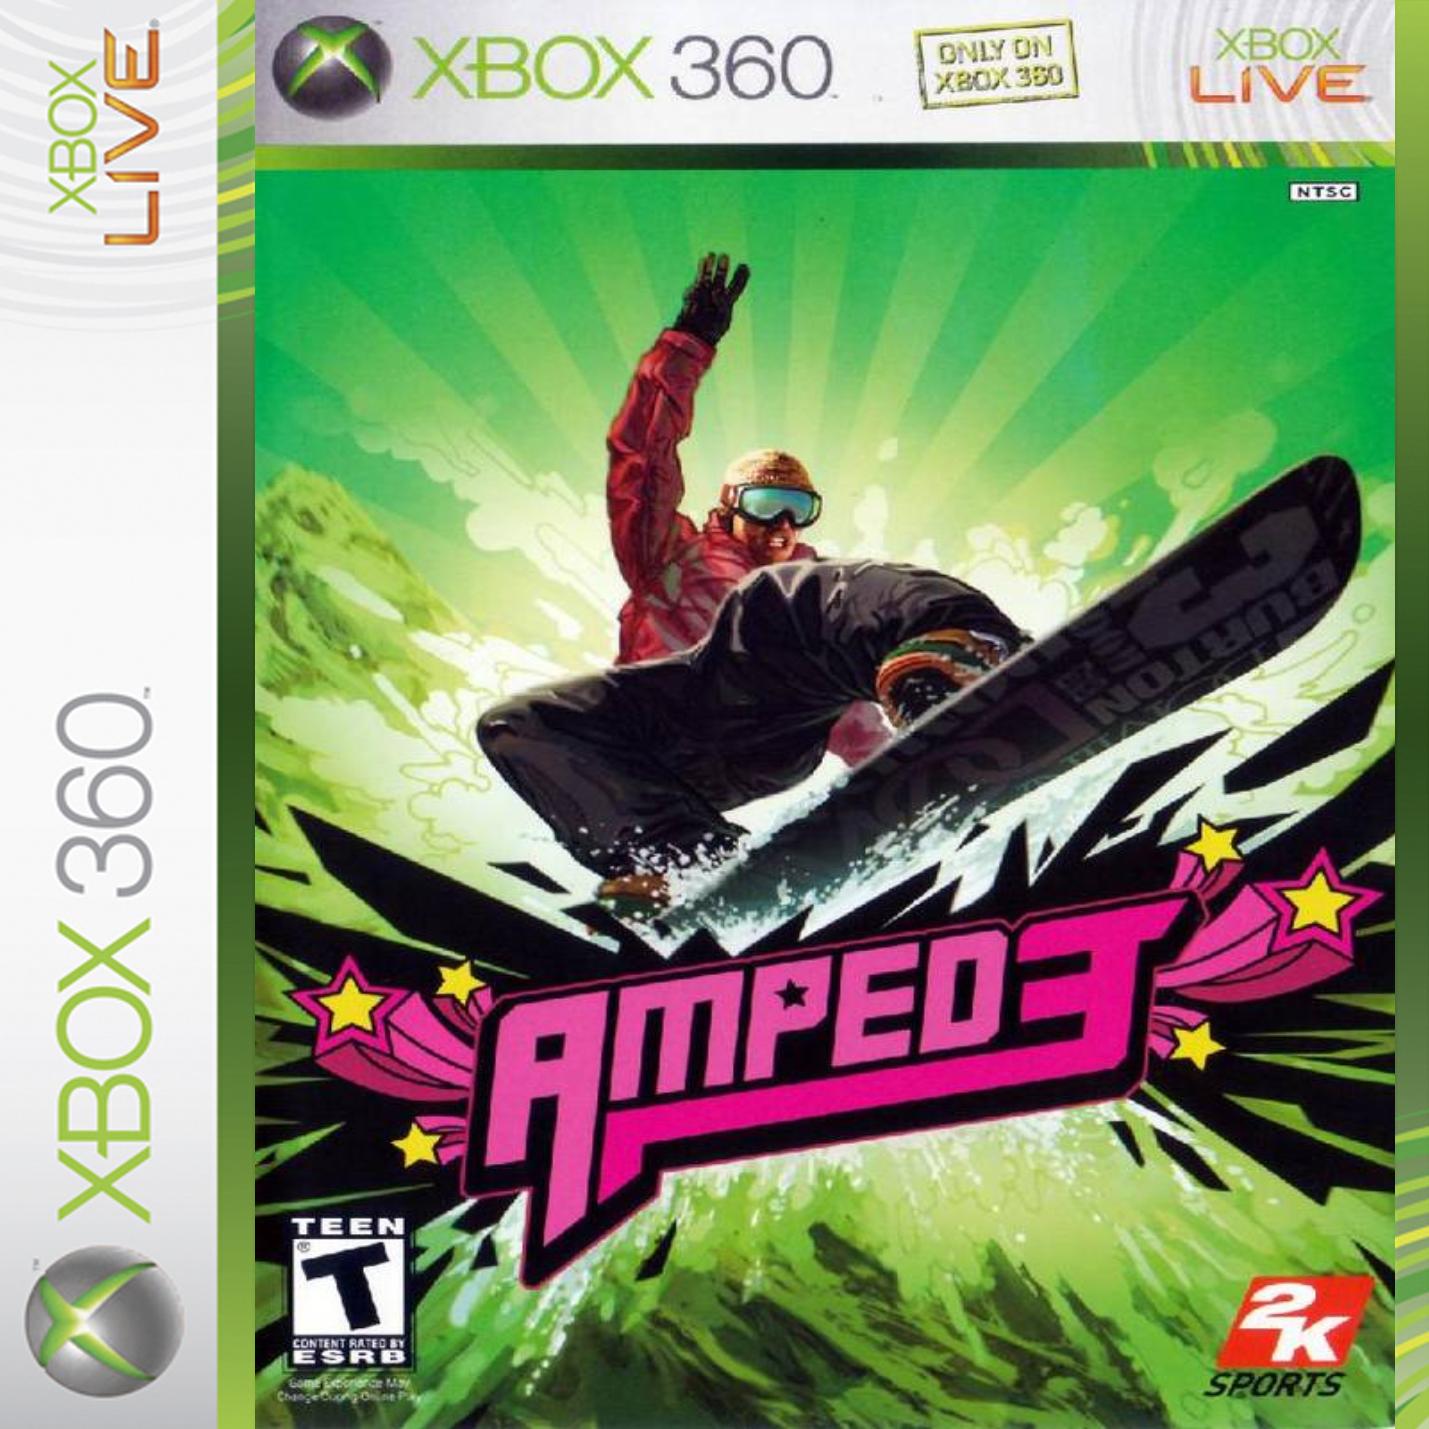 360: AMPED 3 (COMPLETE)